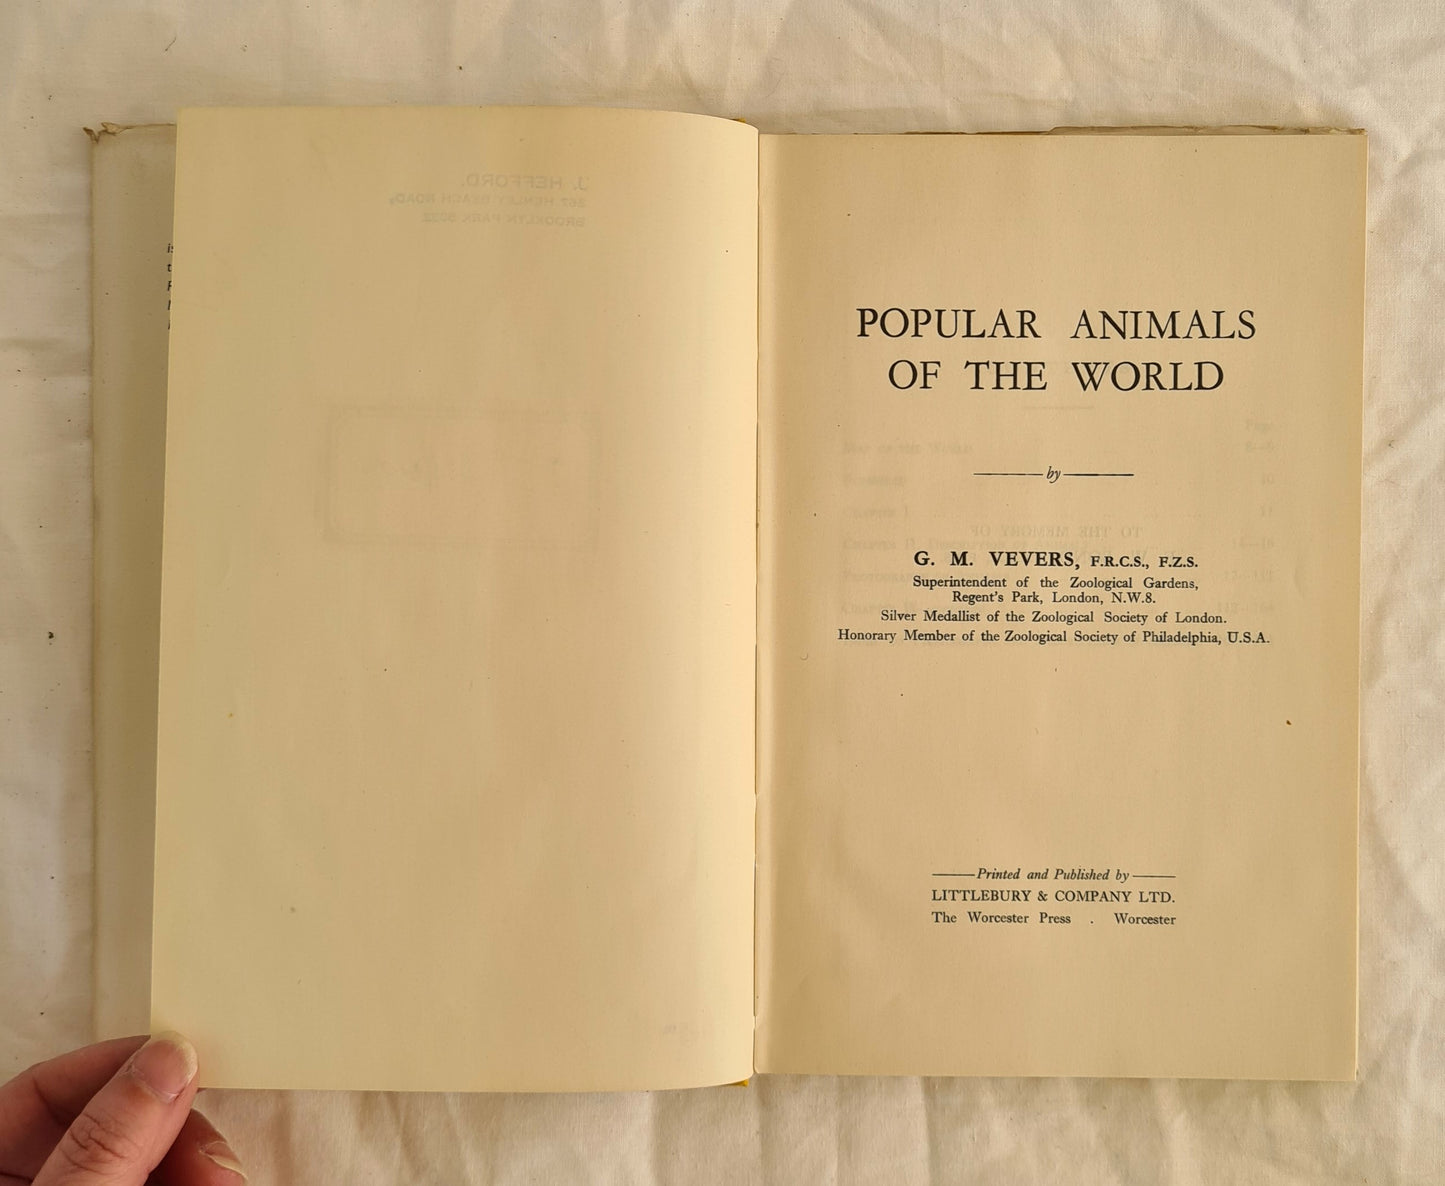 Popular Animals of the World by G. M. Vevers